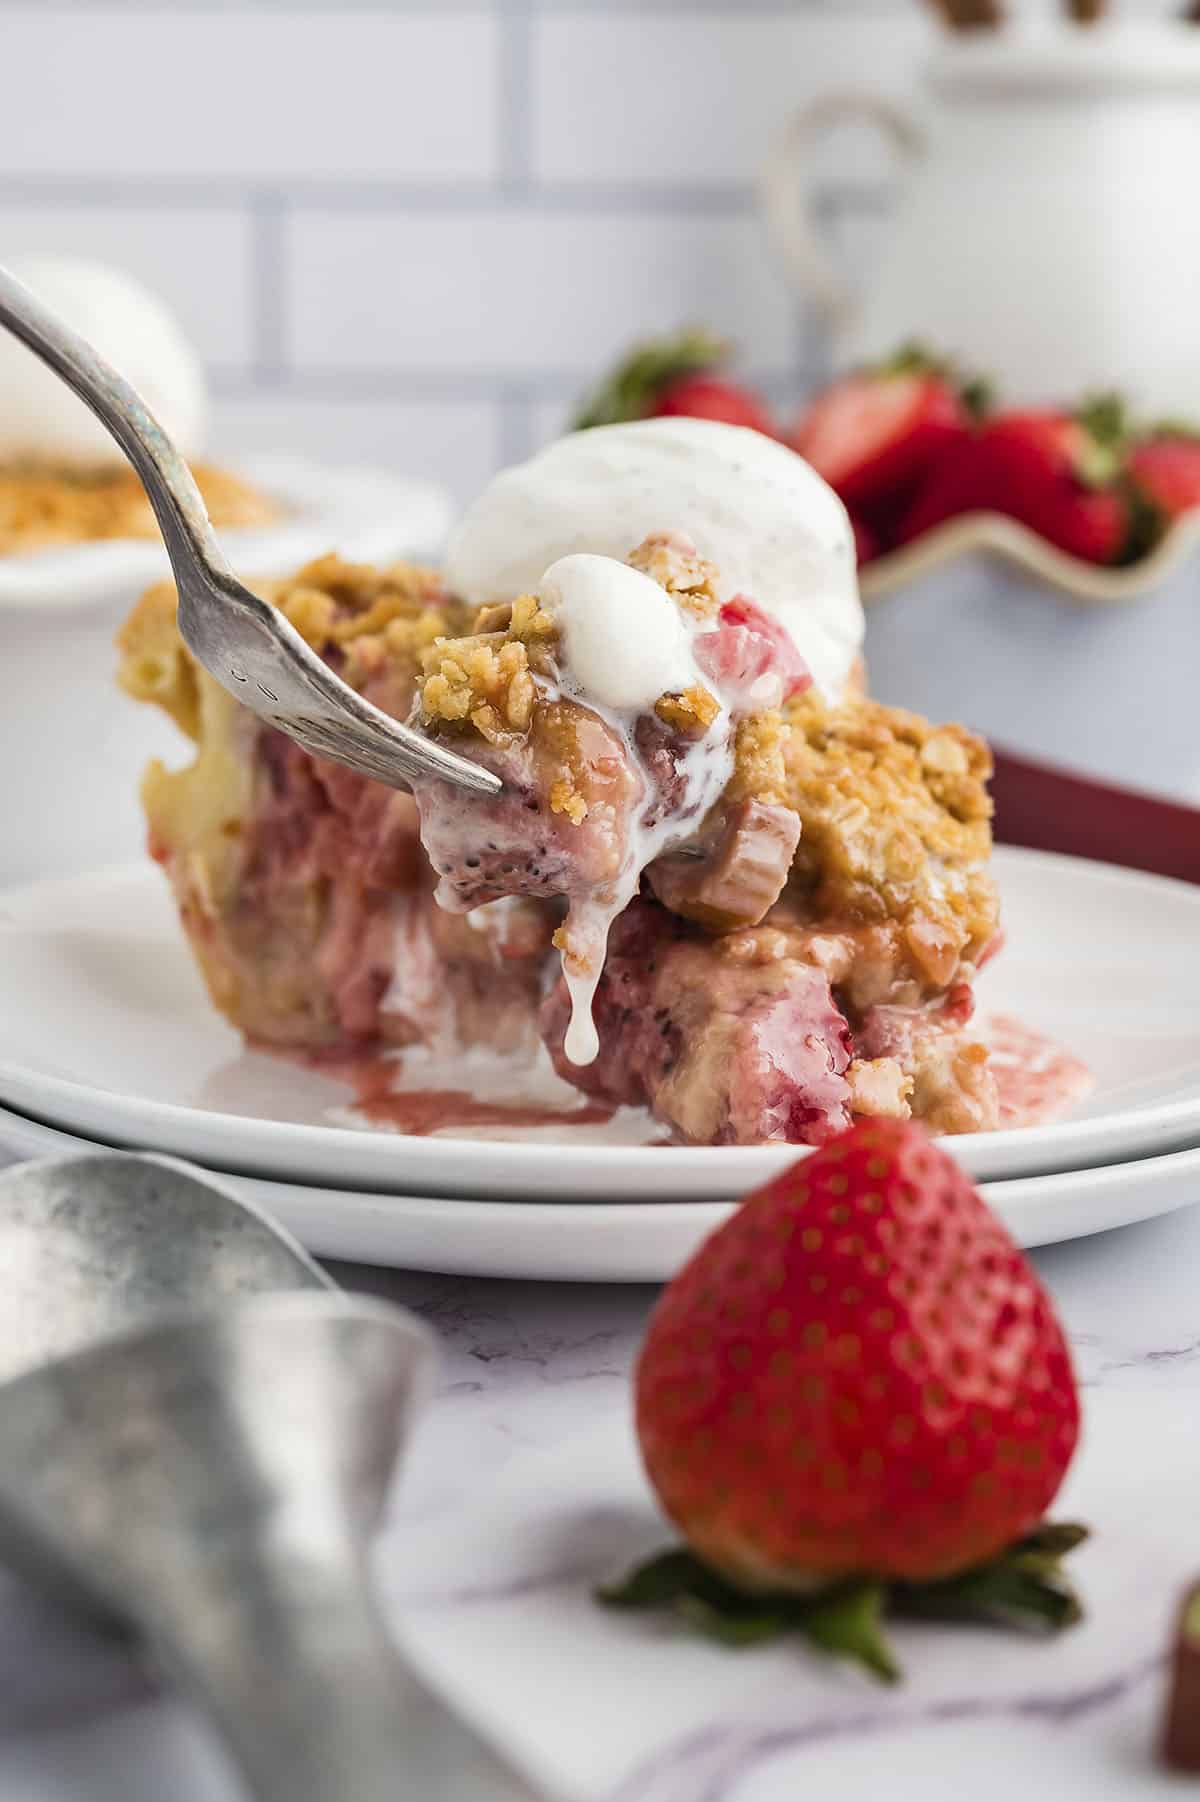 Strawberry rhubarb pie topped with a scoop of vanilla ice cream.